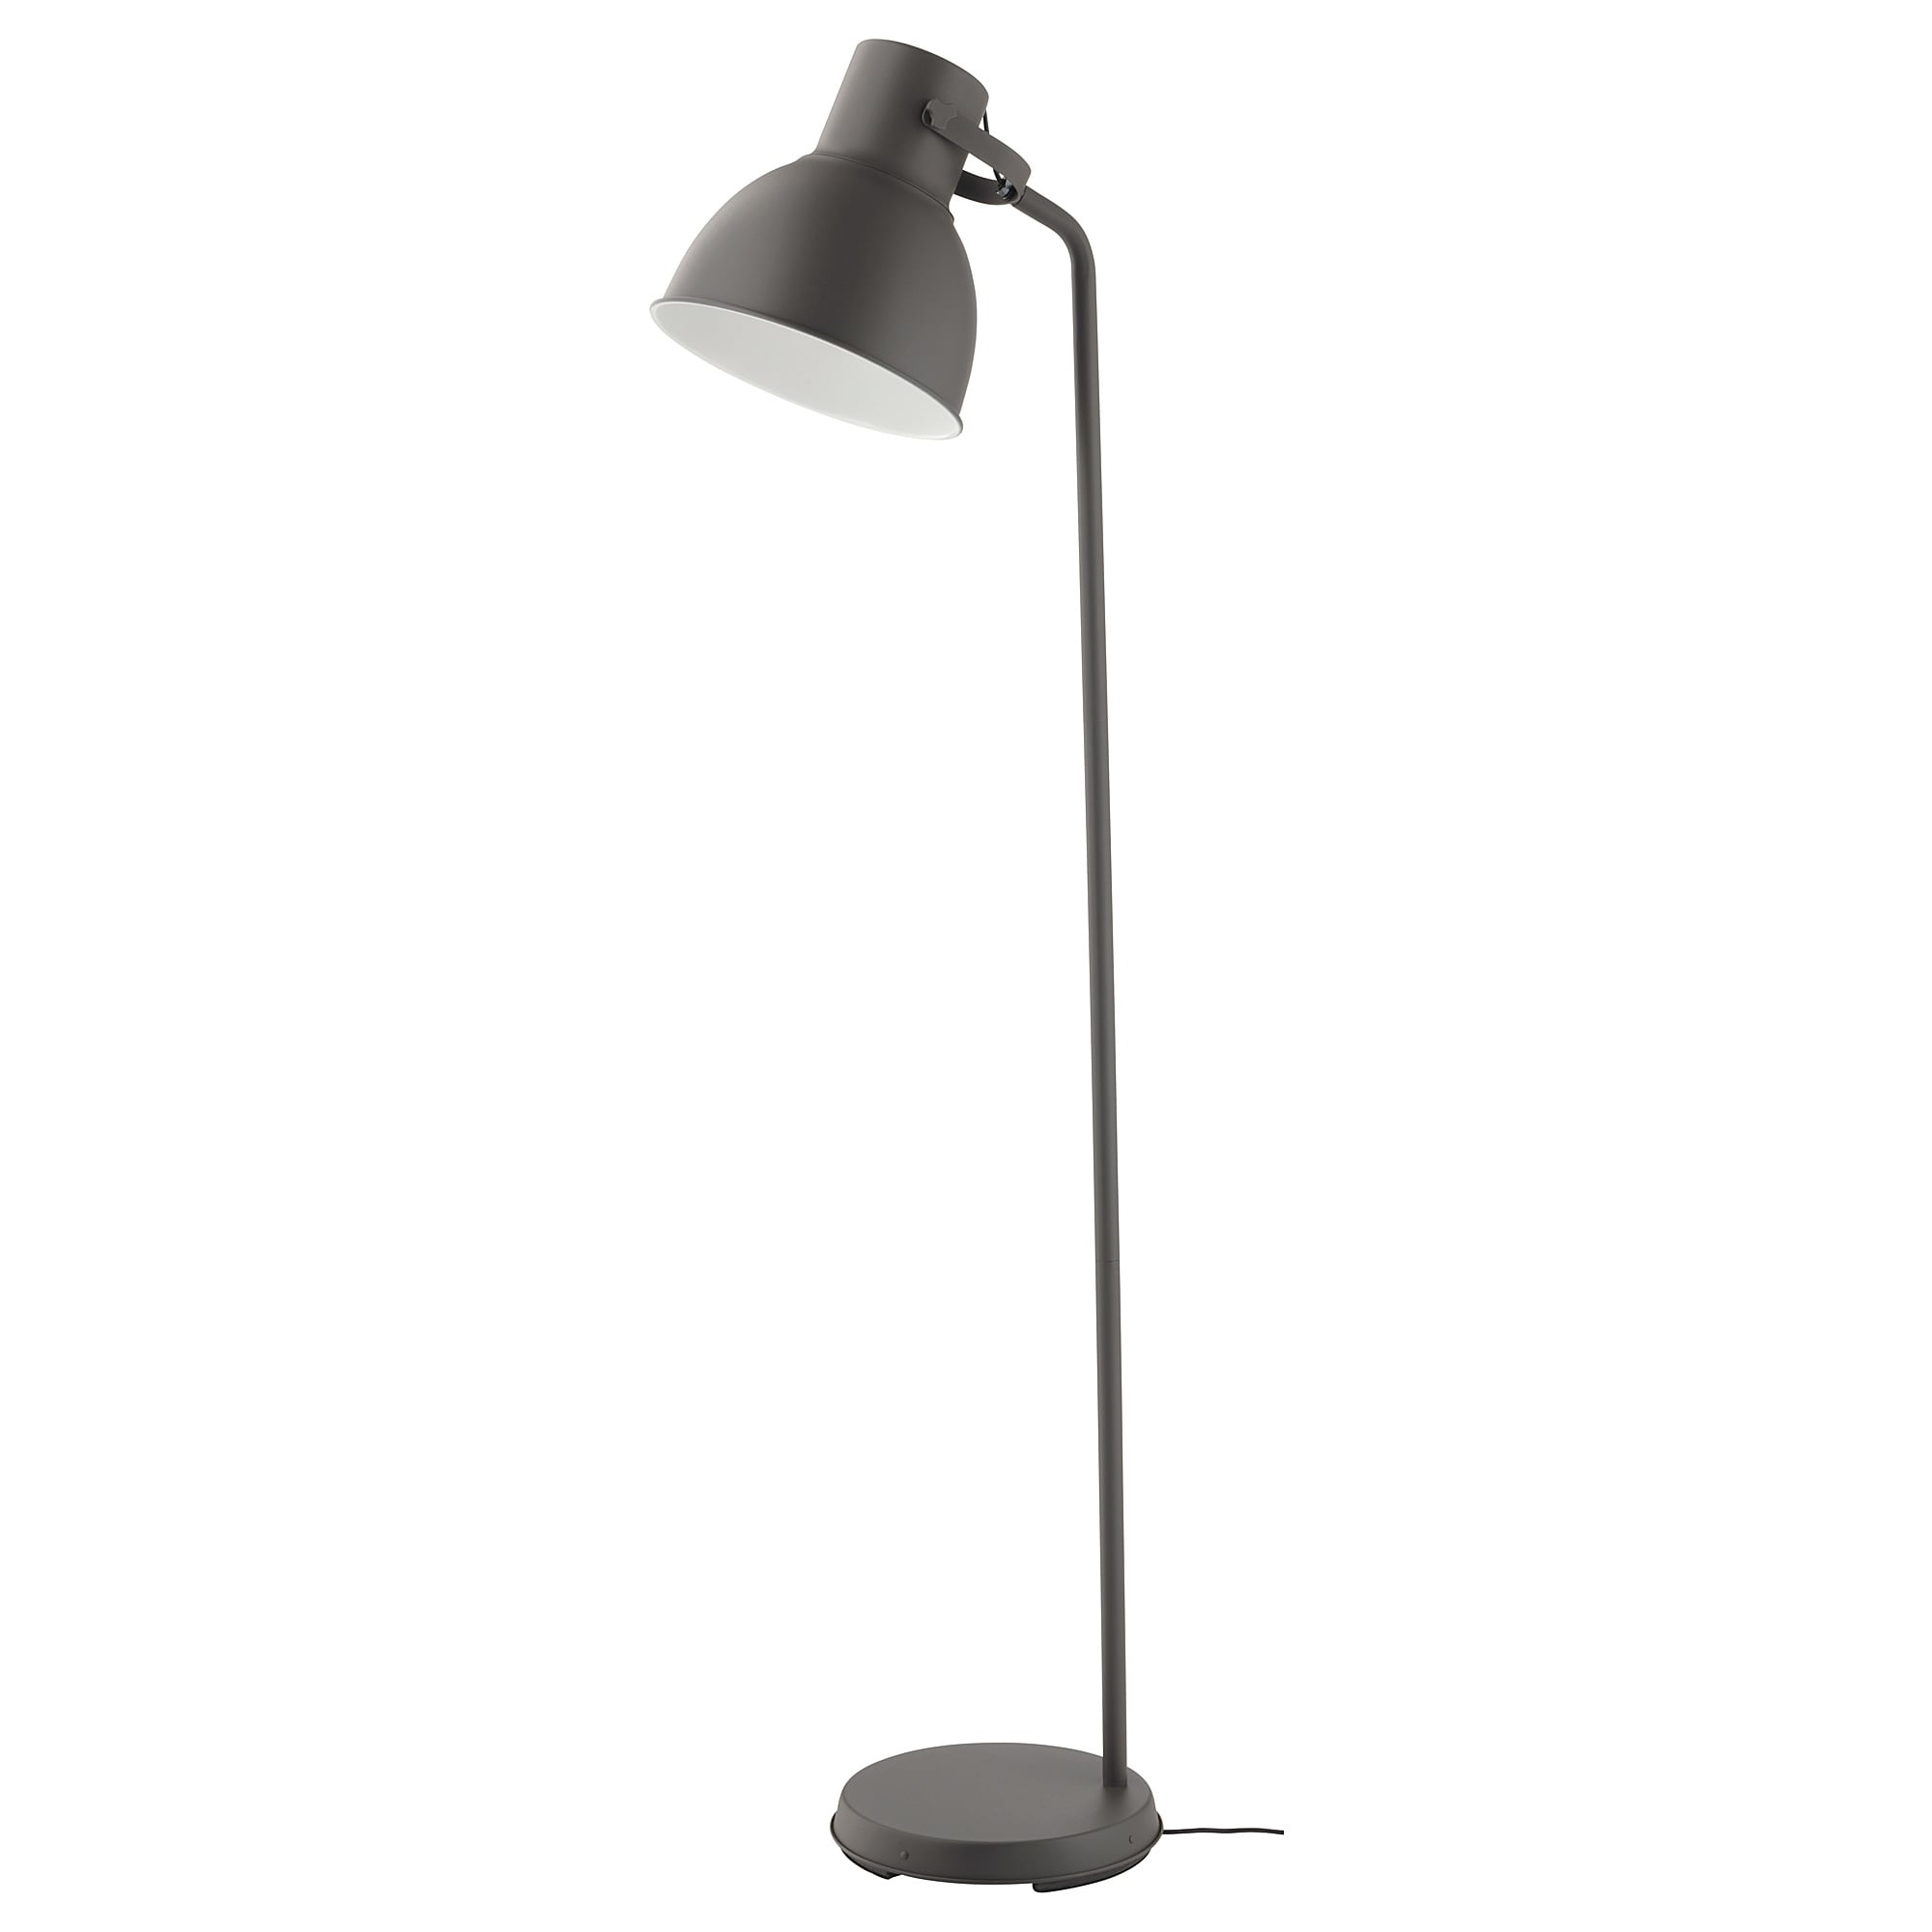 Awesome Grey Floor Lamp Modern Metal Light Abstract Standard with sizing 2000 X 2000